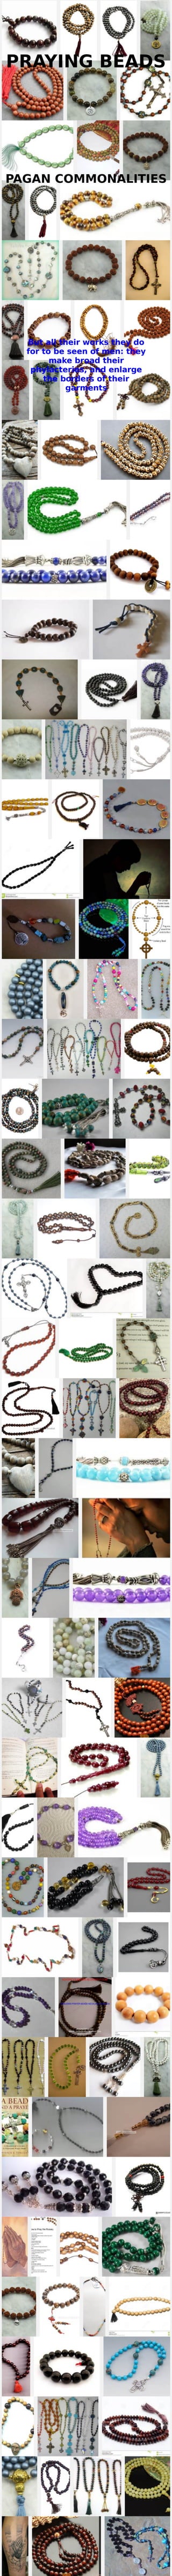 PRAYING BEADS
PAGAN COMMONALITIES
But all their works they do
for to be seen of men: they
make broad their
phylacteries, and enlarge
the borders of their
garments
 